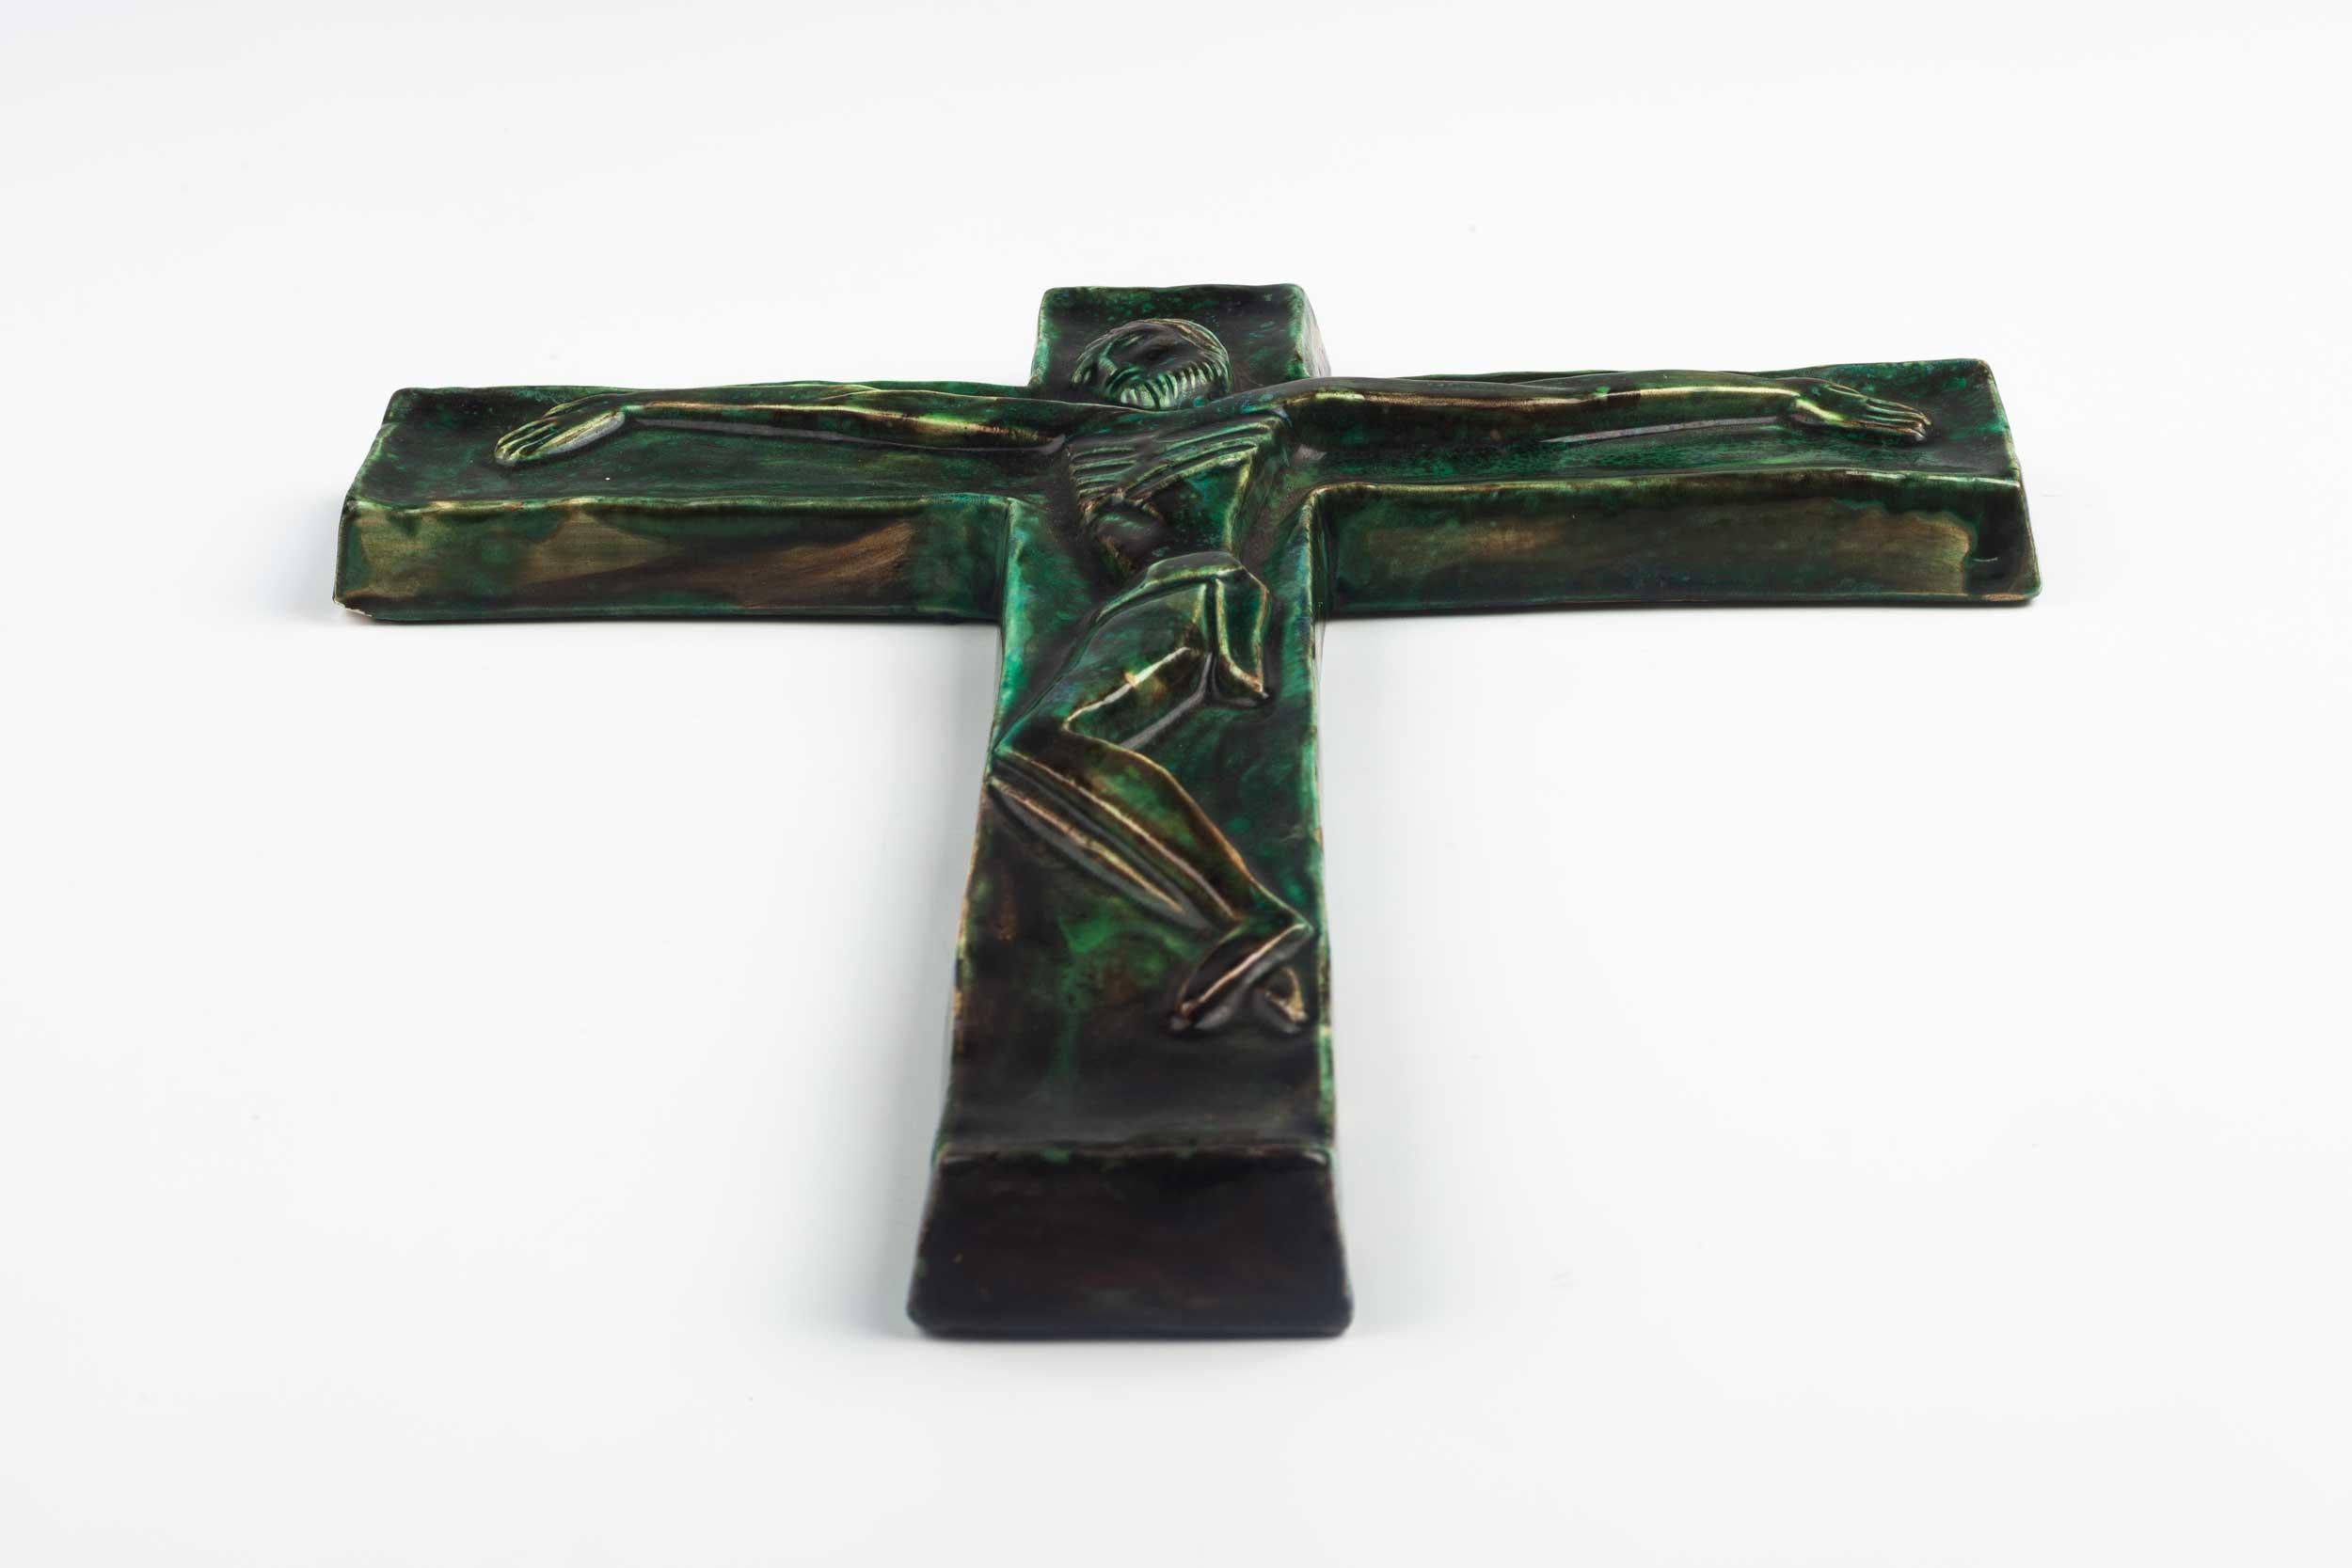 Midcentury European wall crucifix in glazed, hand painted green ceramic depicting stylistic Christ on green cross. From a large collection of vintage crosses handmade by Flemish artisans. 

From modernism to brutalism, the crosses in our